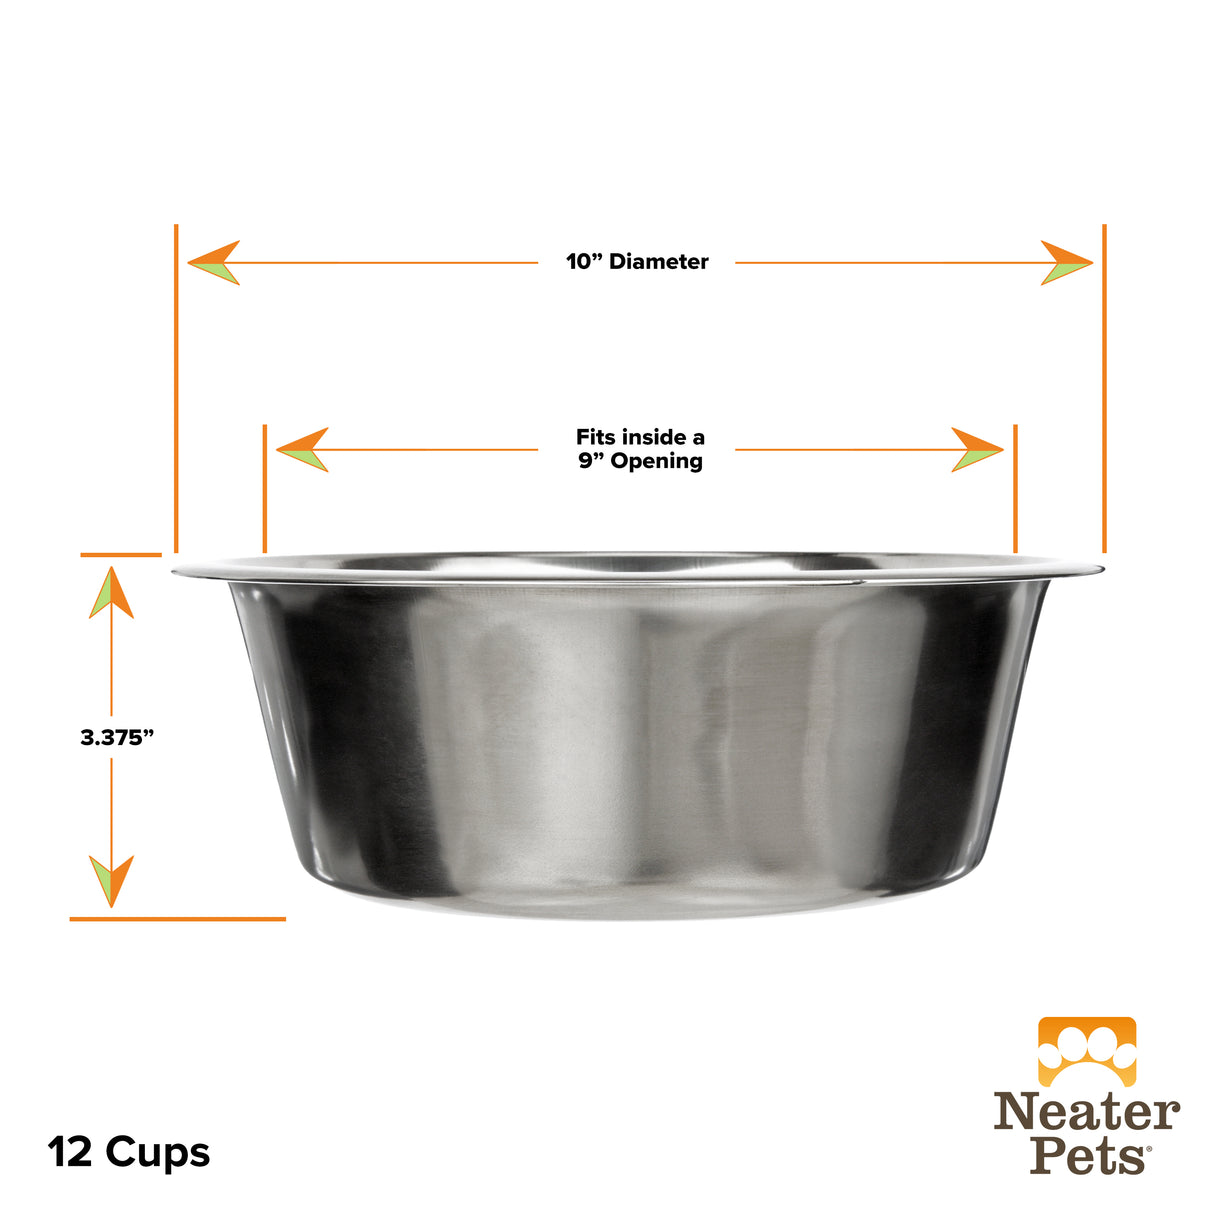 Dimensions of the 12 cup stainless steel bowl